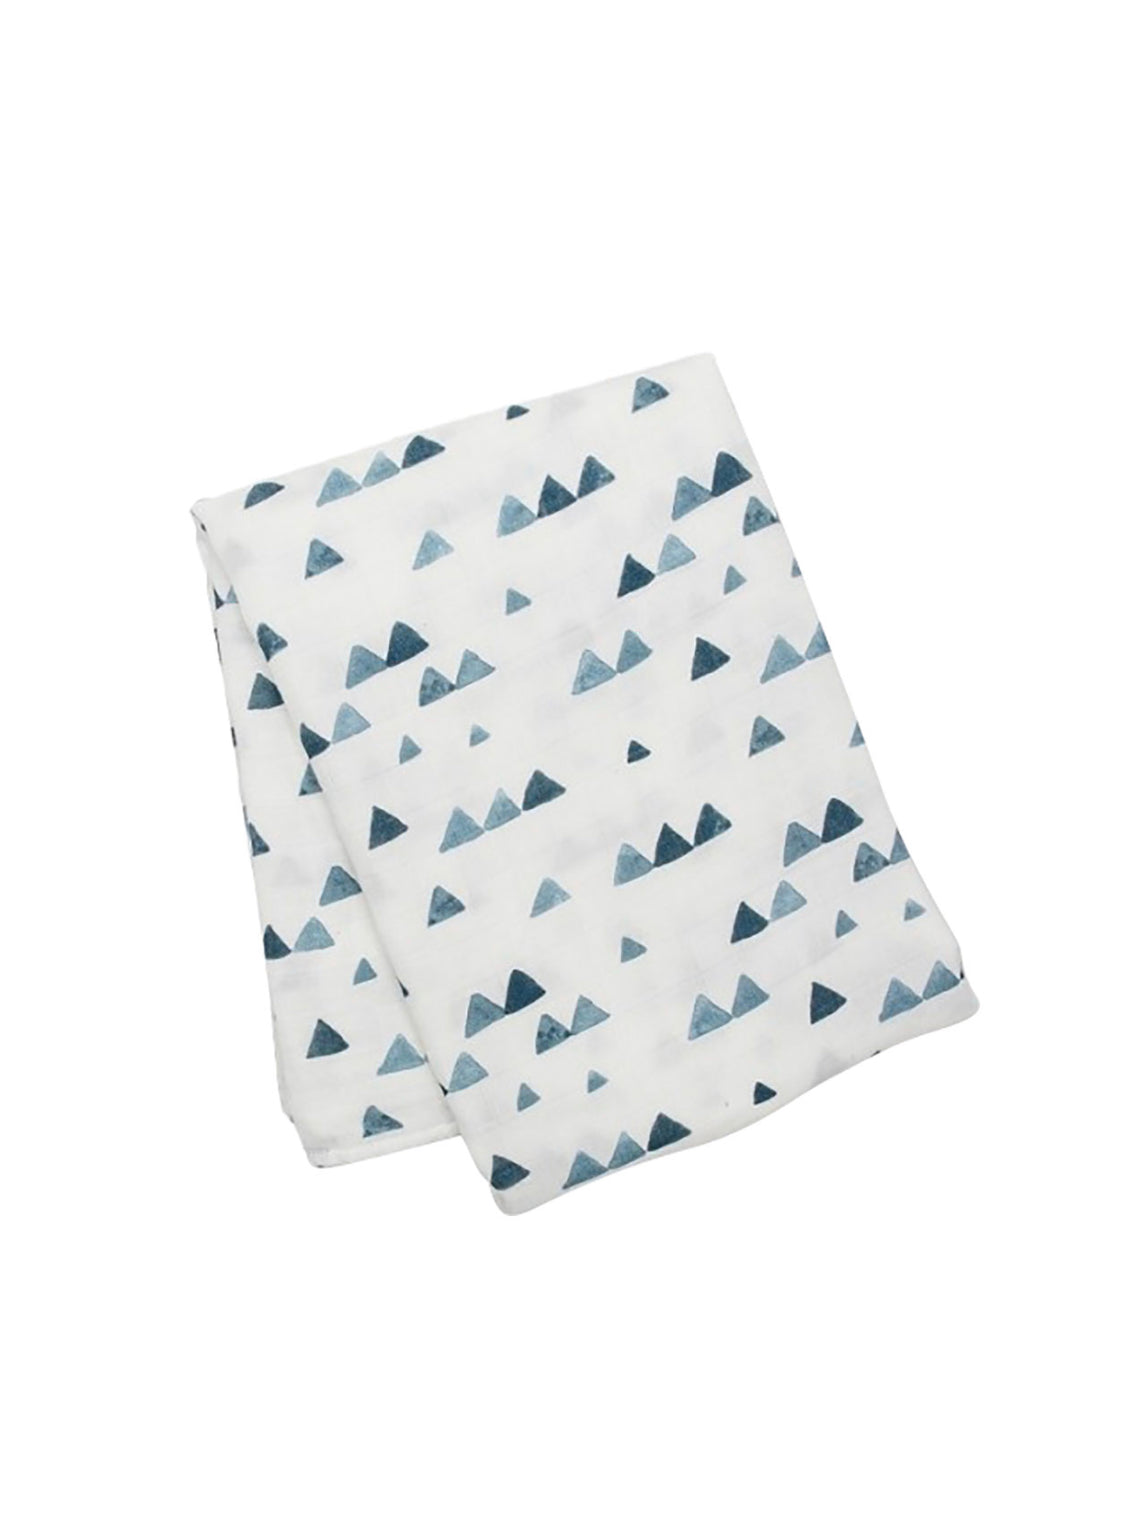 Lulujo - Bamboo Hat & Swaddle Blanket - Navy Triangles.